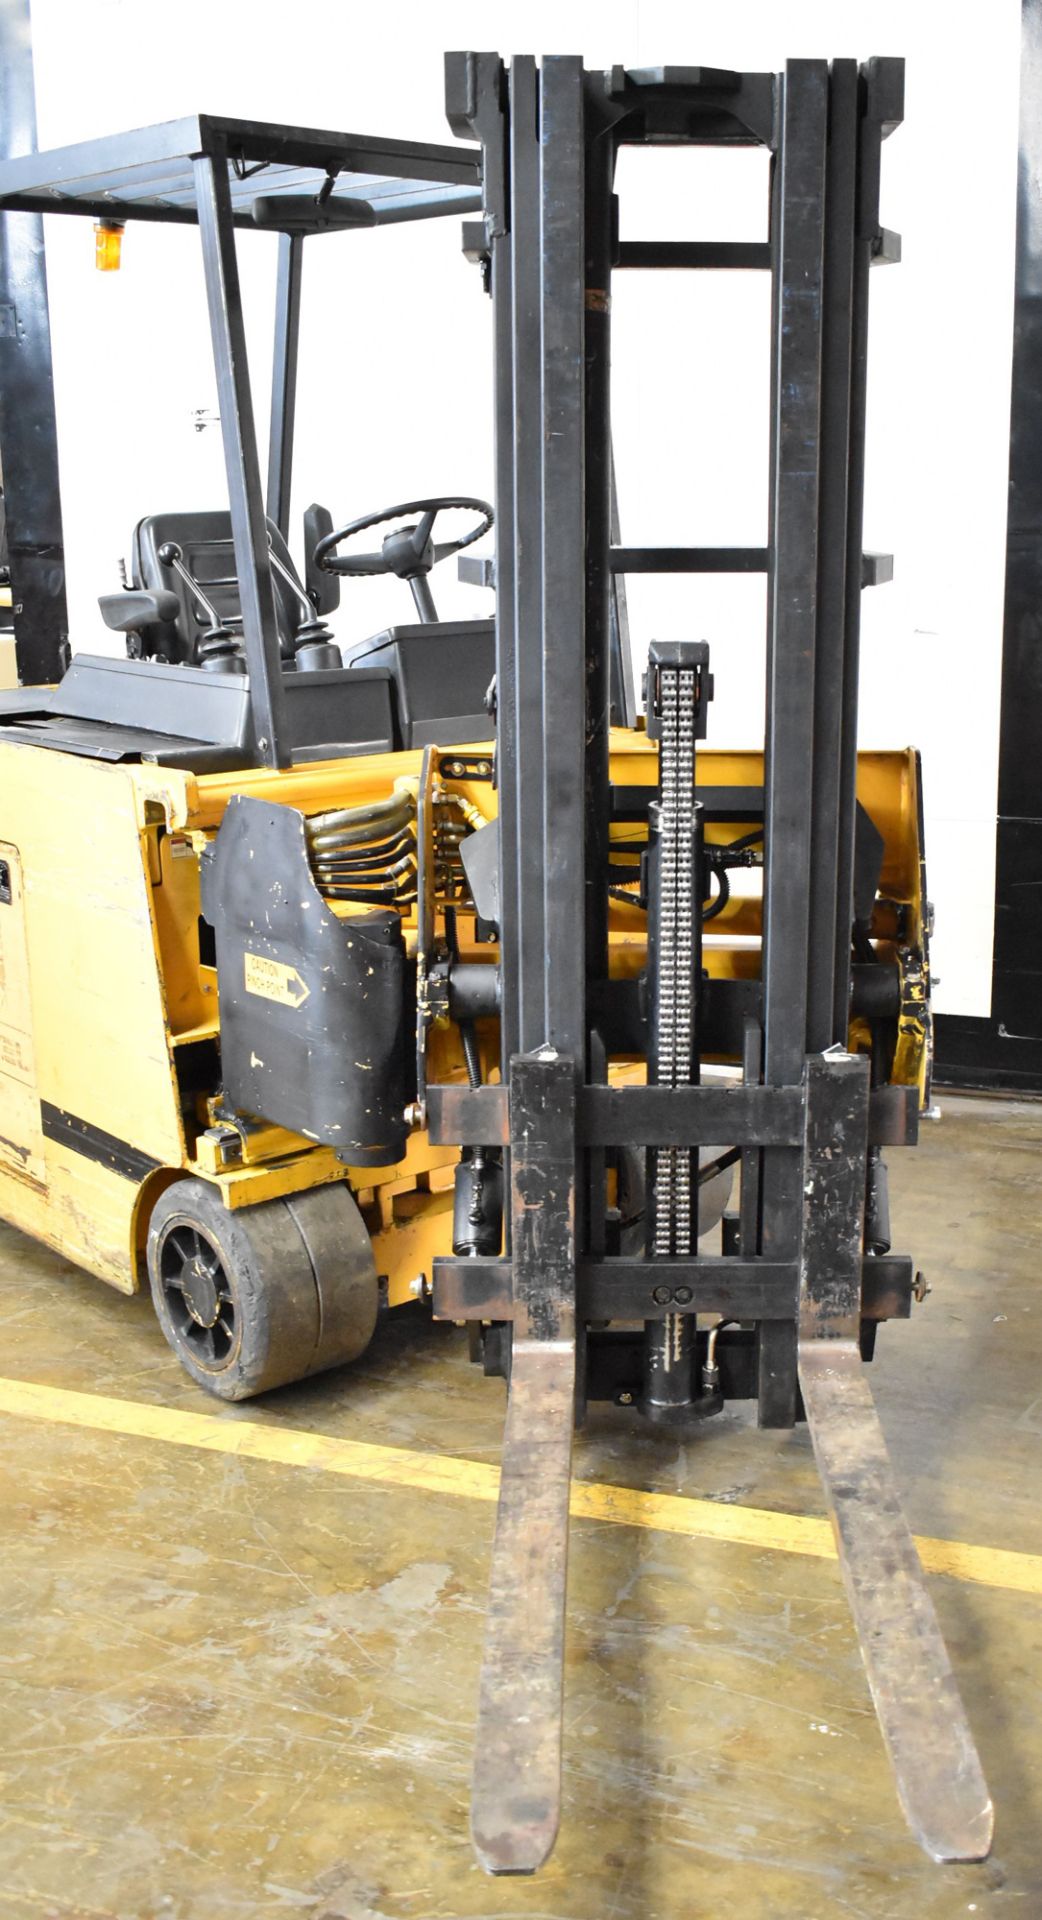 DREXEL SLT30 36V ELECTRIC NARROW AISLE COUNTERBALANCE FORKLIFT WITH 3,000 LB CAPACITY, 3-STAGE SWING - Image 2 of 10